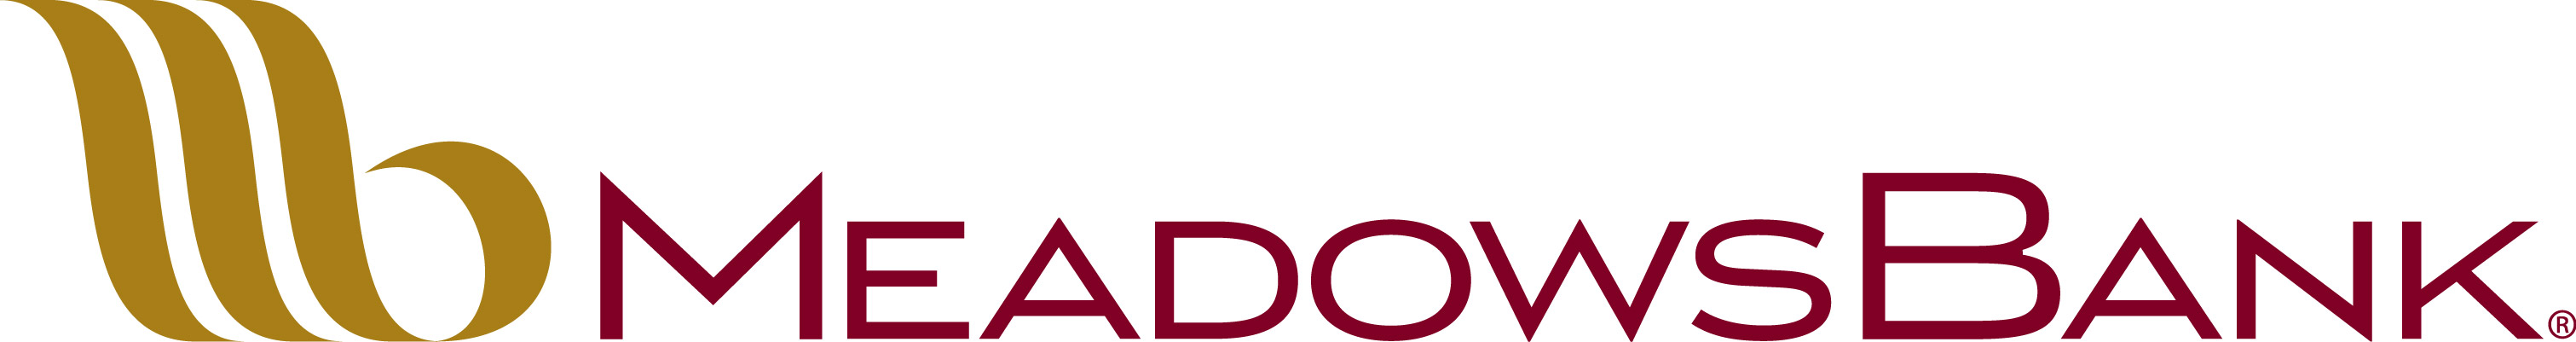 Meadows Bank Reports Q1 2021 Financials and Shareholder Dividend